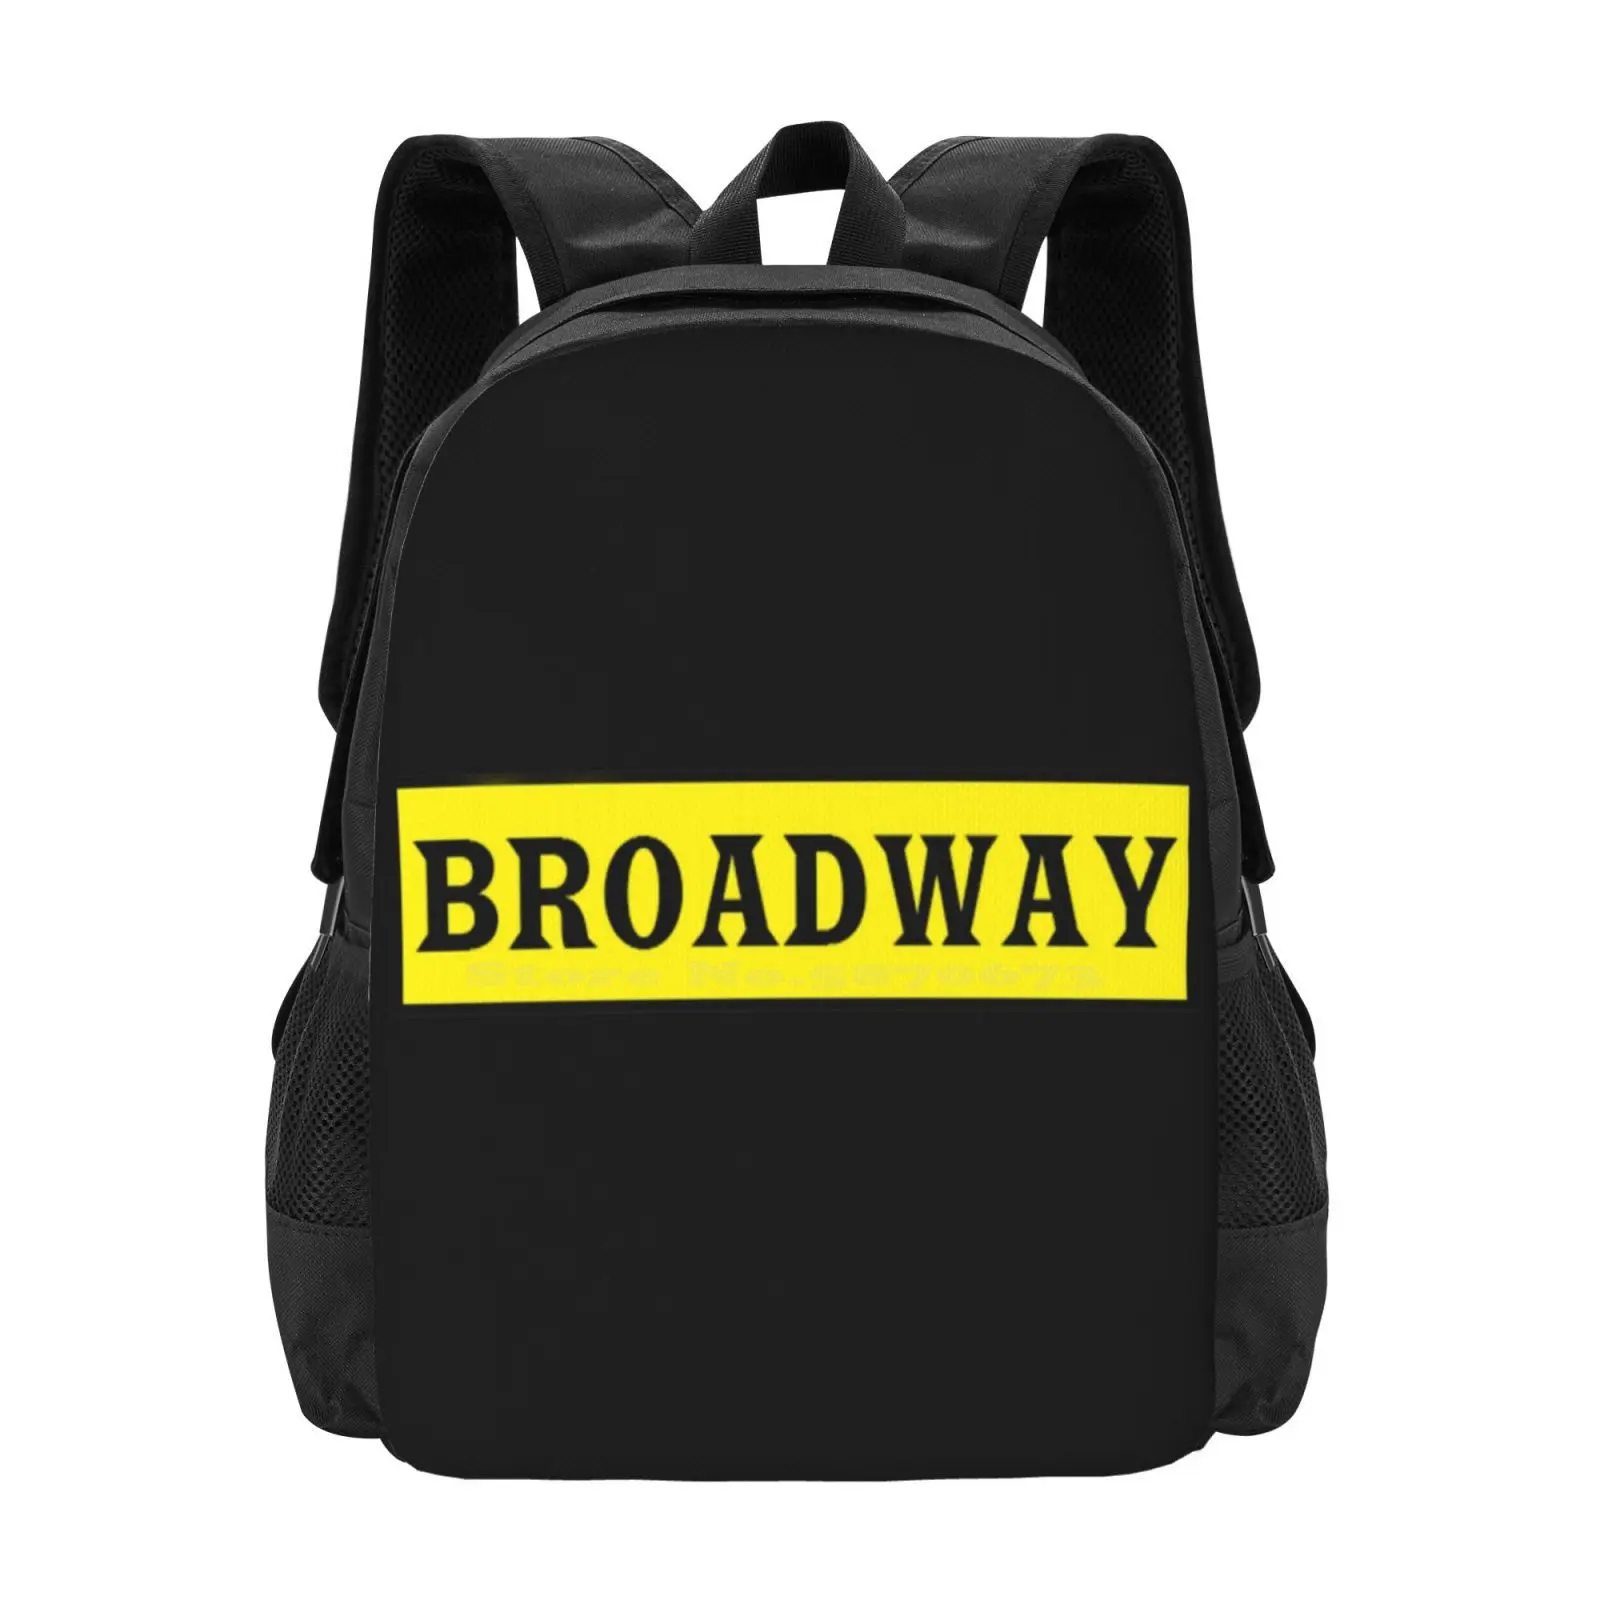 

Broadway New Arrivals Unisex Bags Student Bag Backpack Broadway Musical Theater Nerd Musicals Playbills Musical Theatre Yellow